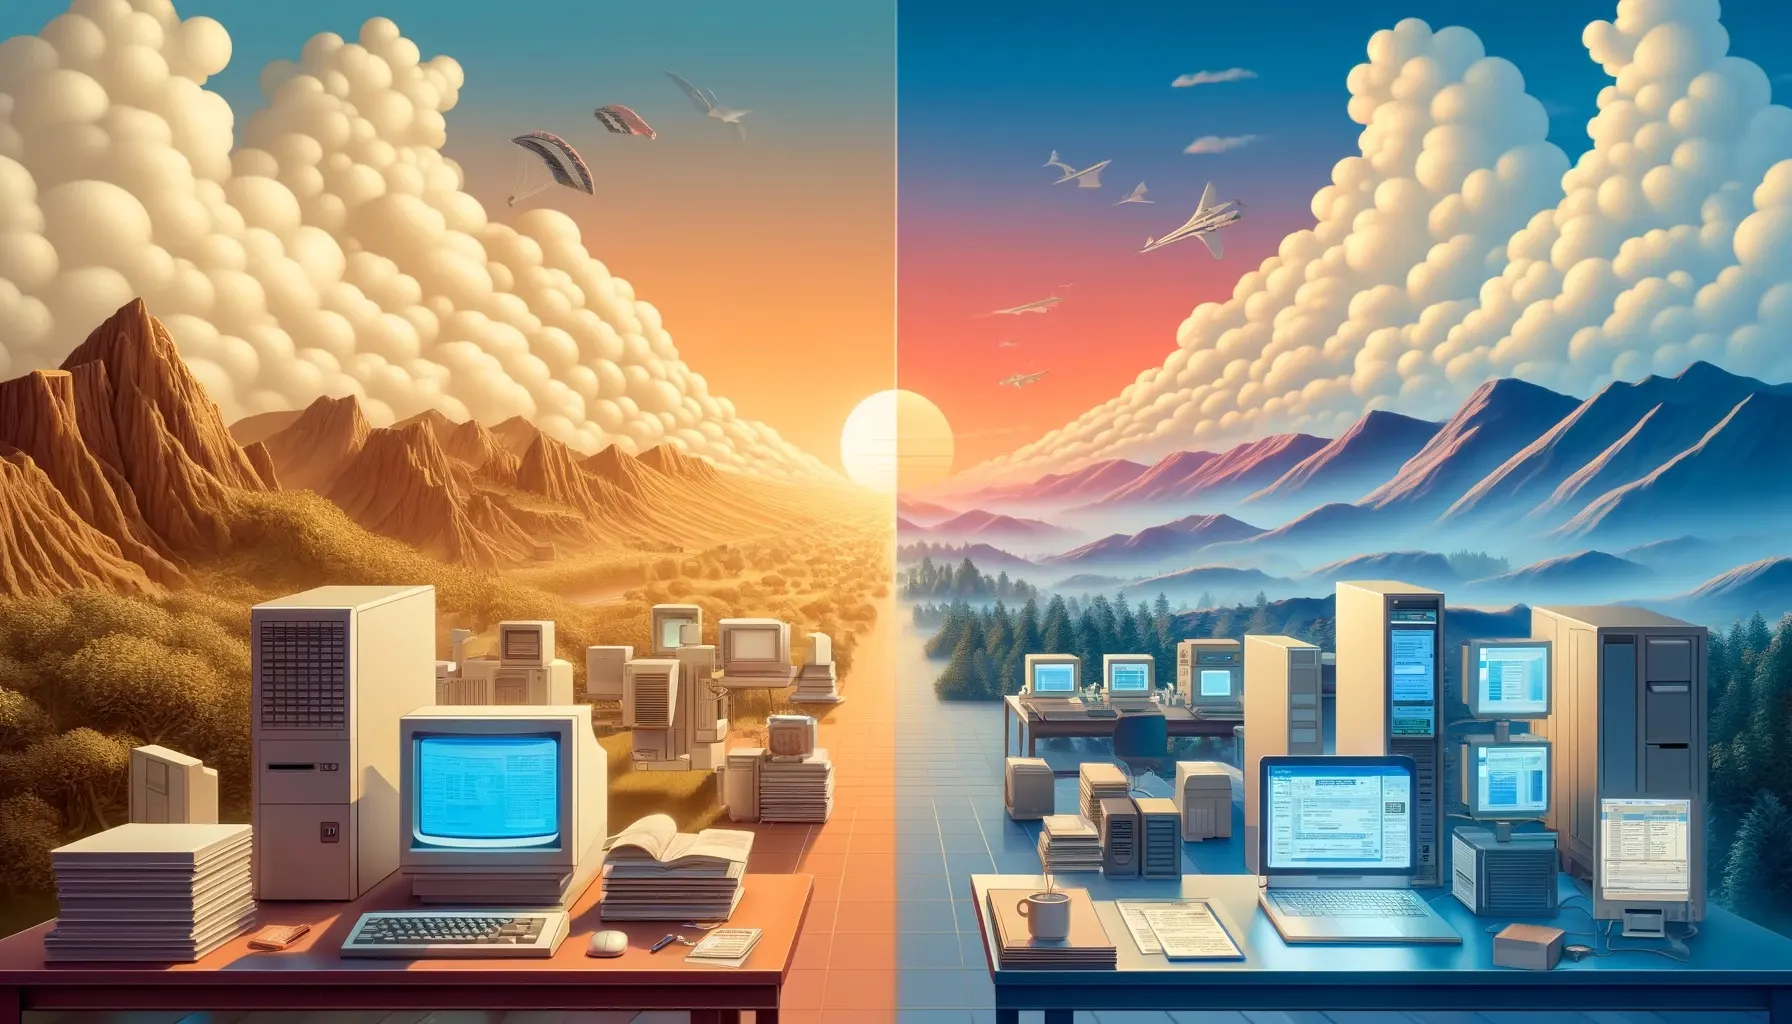  A landscape divided between traditional computing architecture and modern Zero-Knowledge proofs, with a glowing sun bisecting the scene, depicts the transition from the established to the innovative, emphasizing the revolutionary shift towards verifiable computing within the blockchain ecosystem.